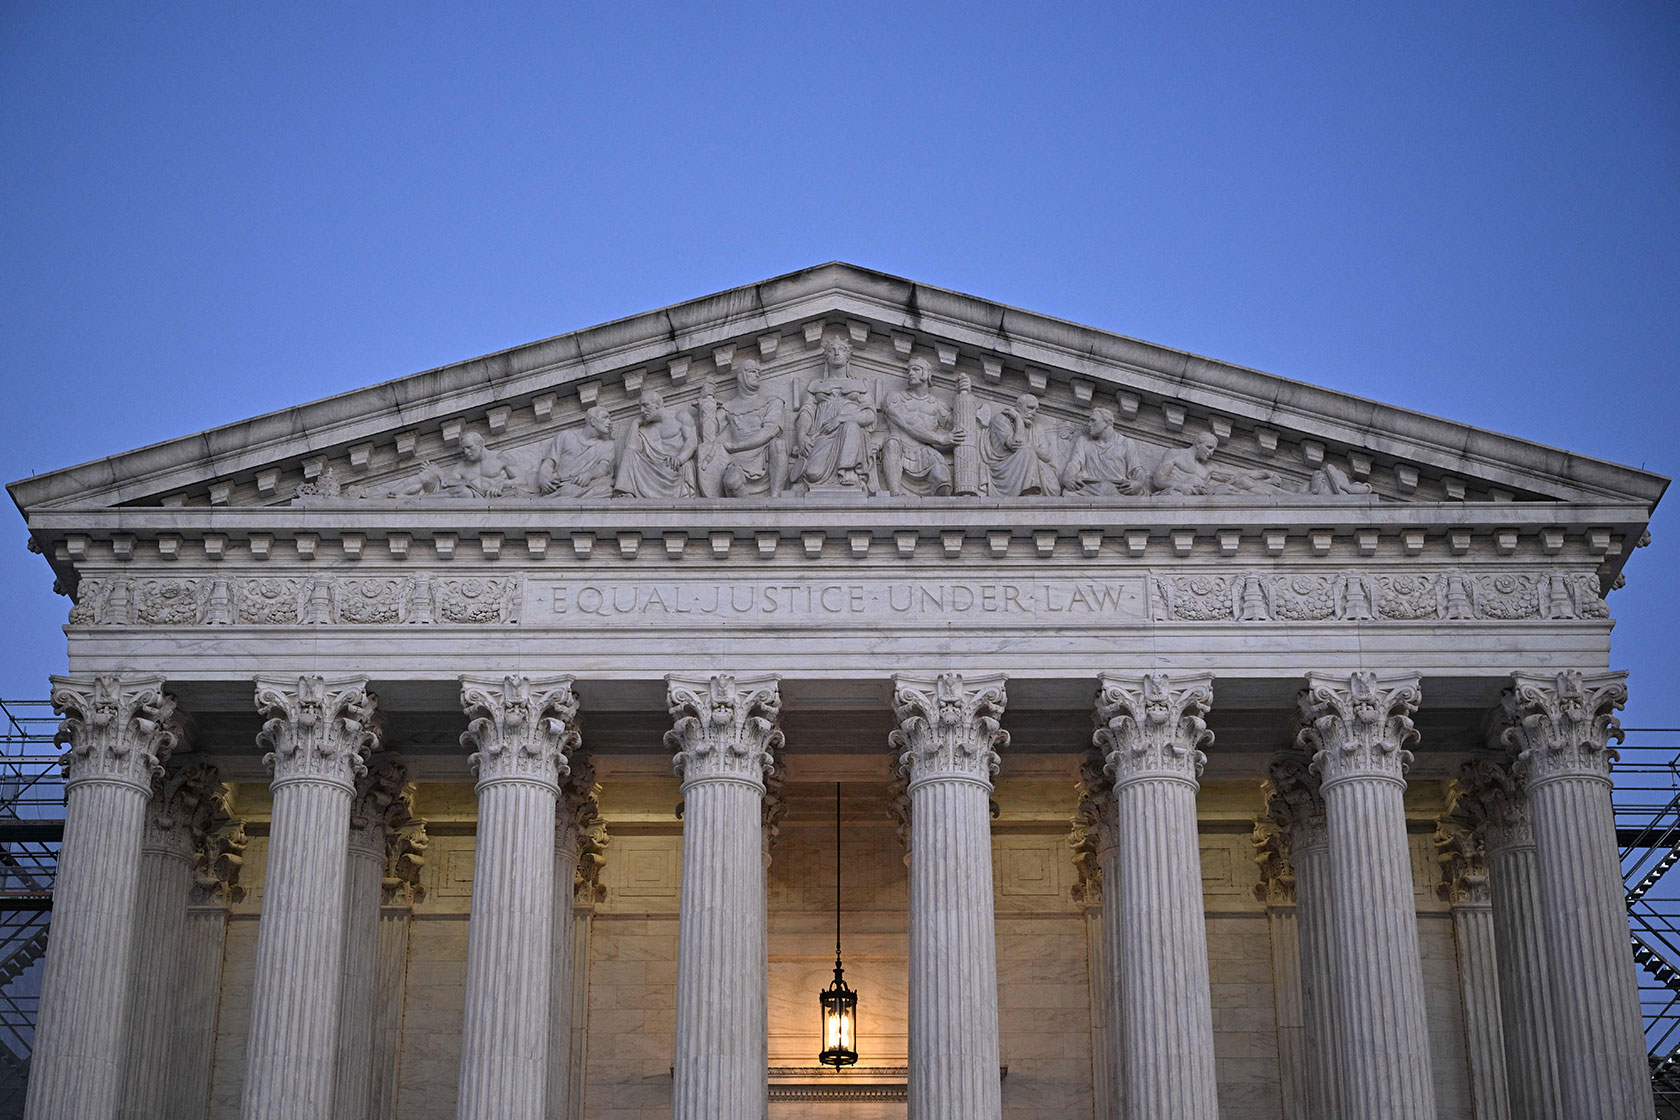 Photo shows the front of the Supreme Court building against a dusky blue sky